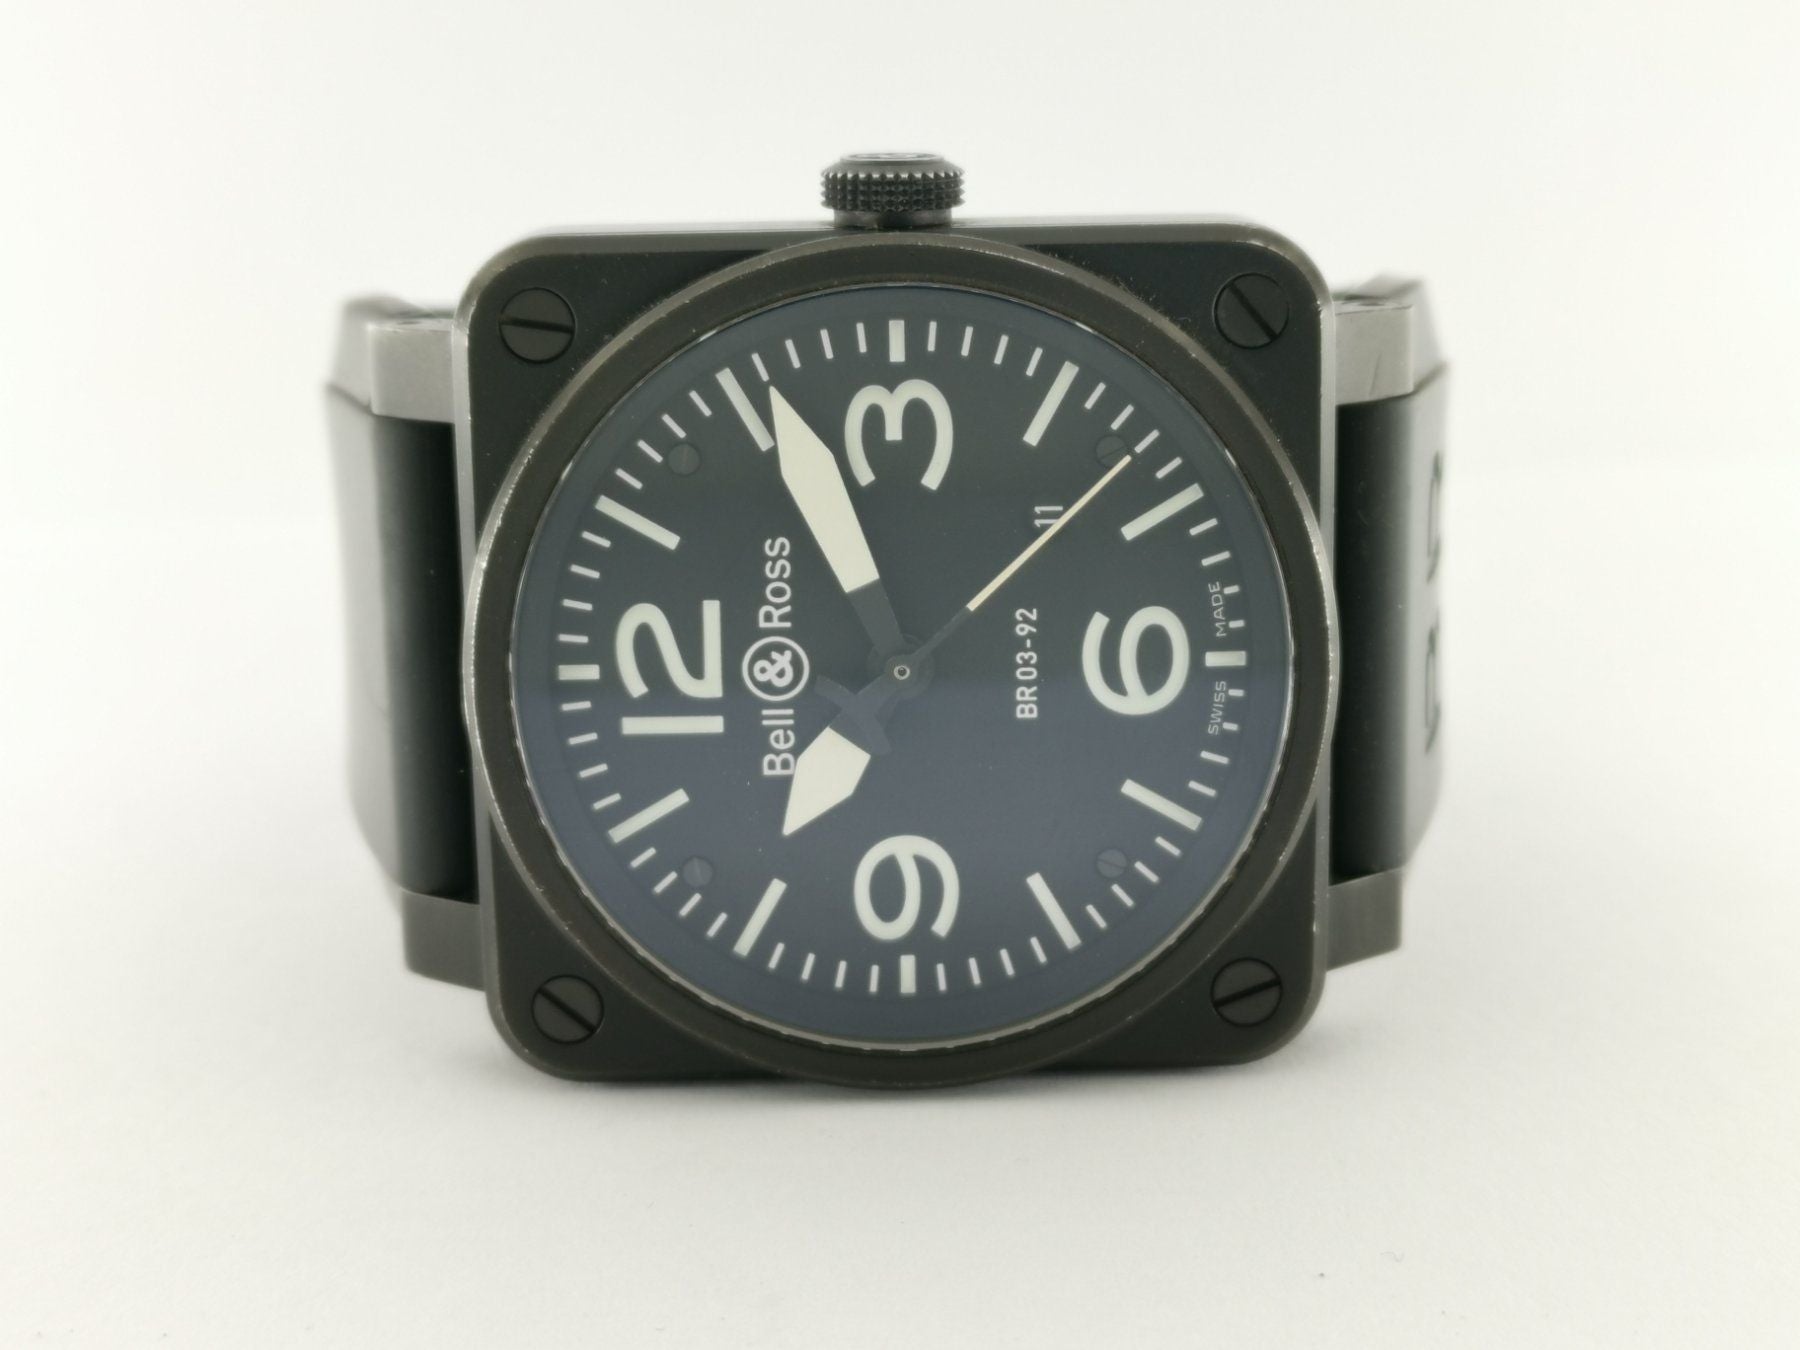 Bell & Ross BR 03-92 automatic